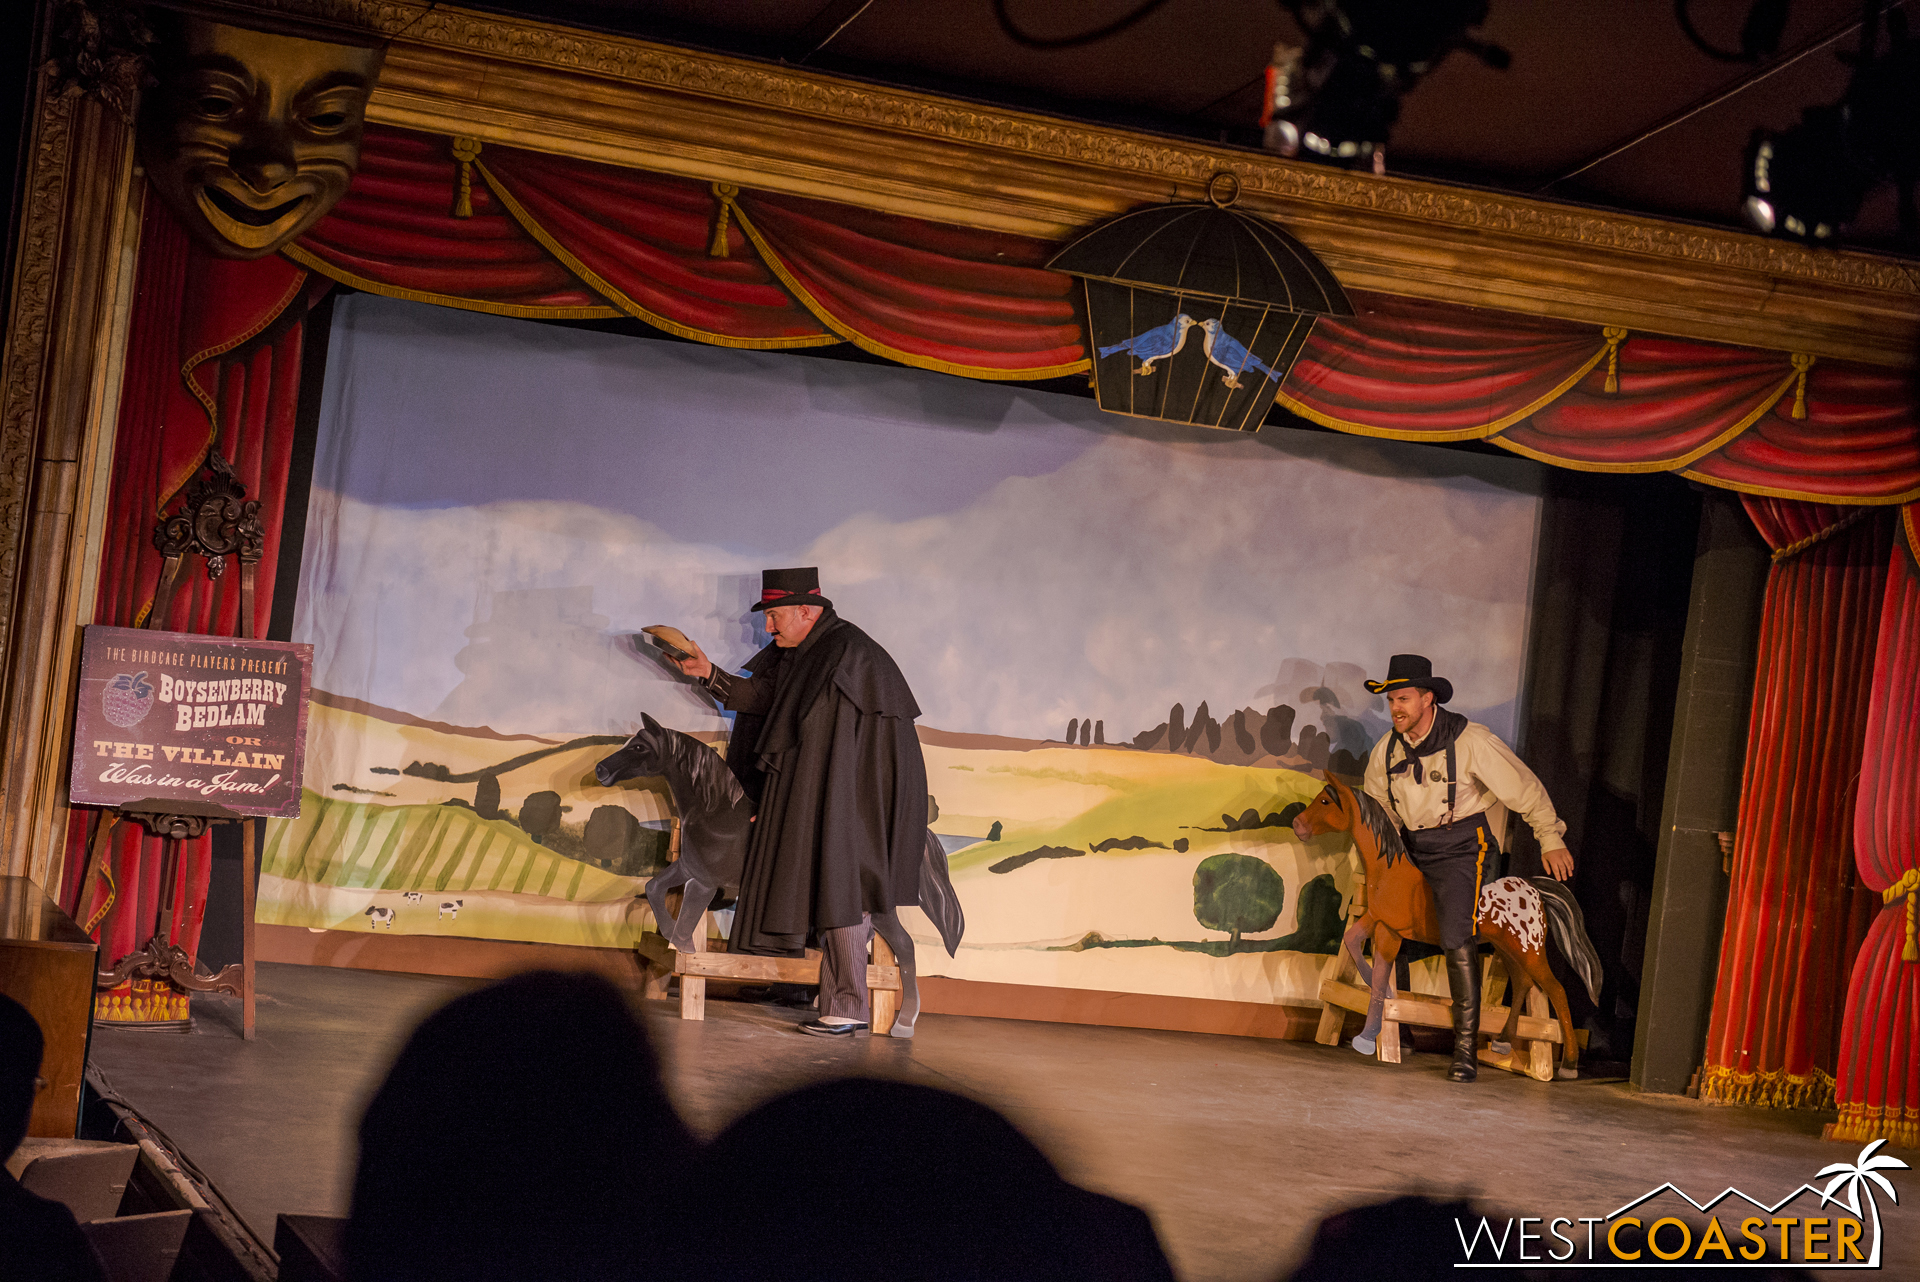  The show climaxes with a daring chase.&nbsp; Does the Sheriff win and apprehend our villain?&nbsp; Watch the show to find out! 